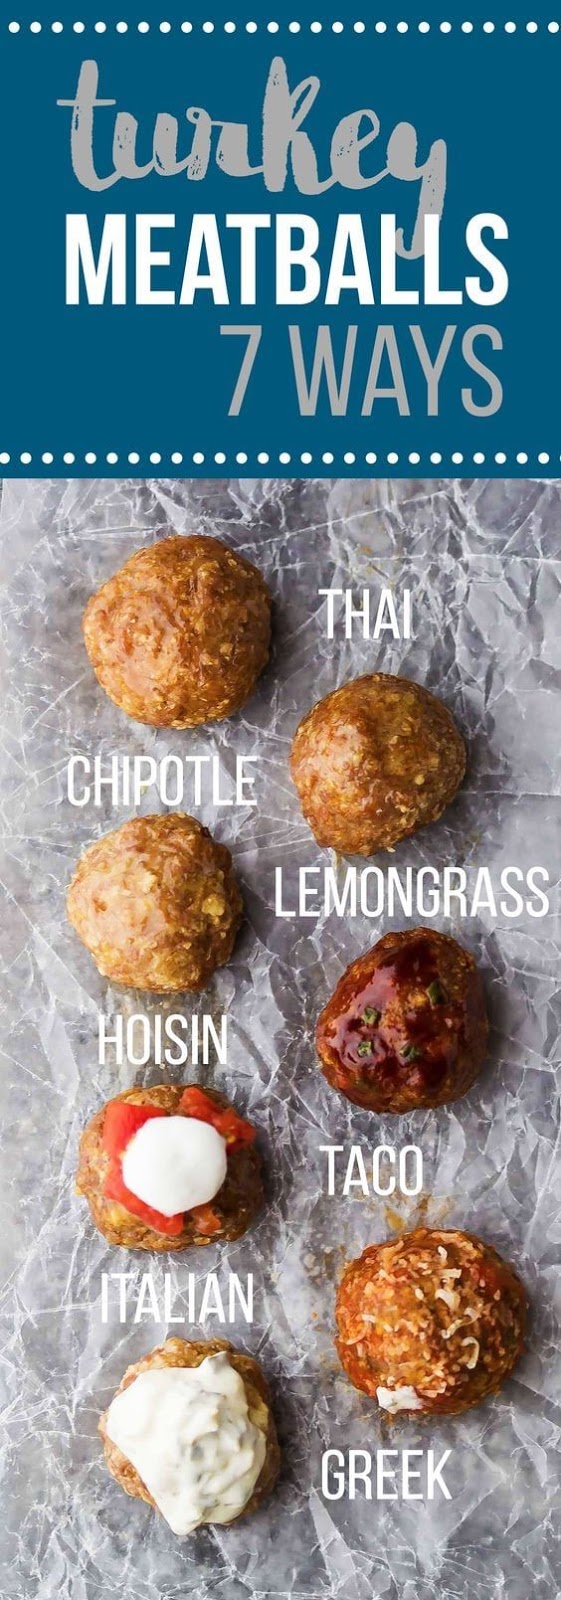 Healthy baked turkey meatballs- the BEST meatballs made with simple pantry ingredients and ready in minutes. Seven different DELICIOUS flavor variations to keep you from getting bored! Learn how to make turkey meatballs ahead and freeze them for easy and convenient dinners. #mealprep #sweetpeasandsaffron #healthy #freezerfriendly #turkey